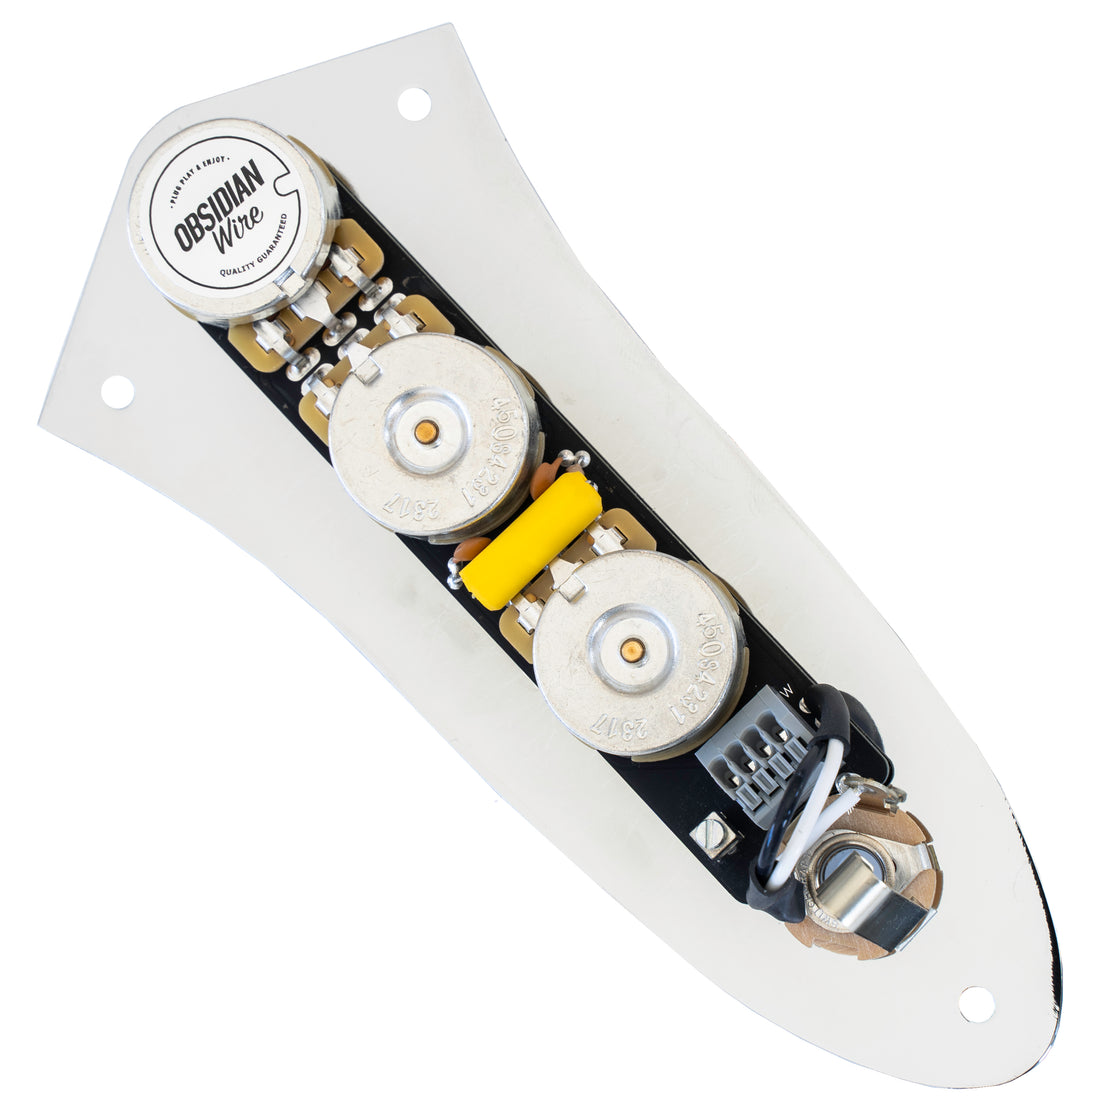 ObsidianWire custom loaded control plate for jass bass showing the pro-wired electronicson a white background